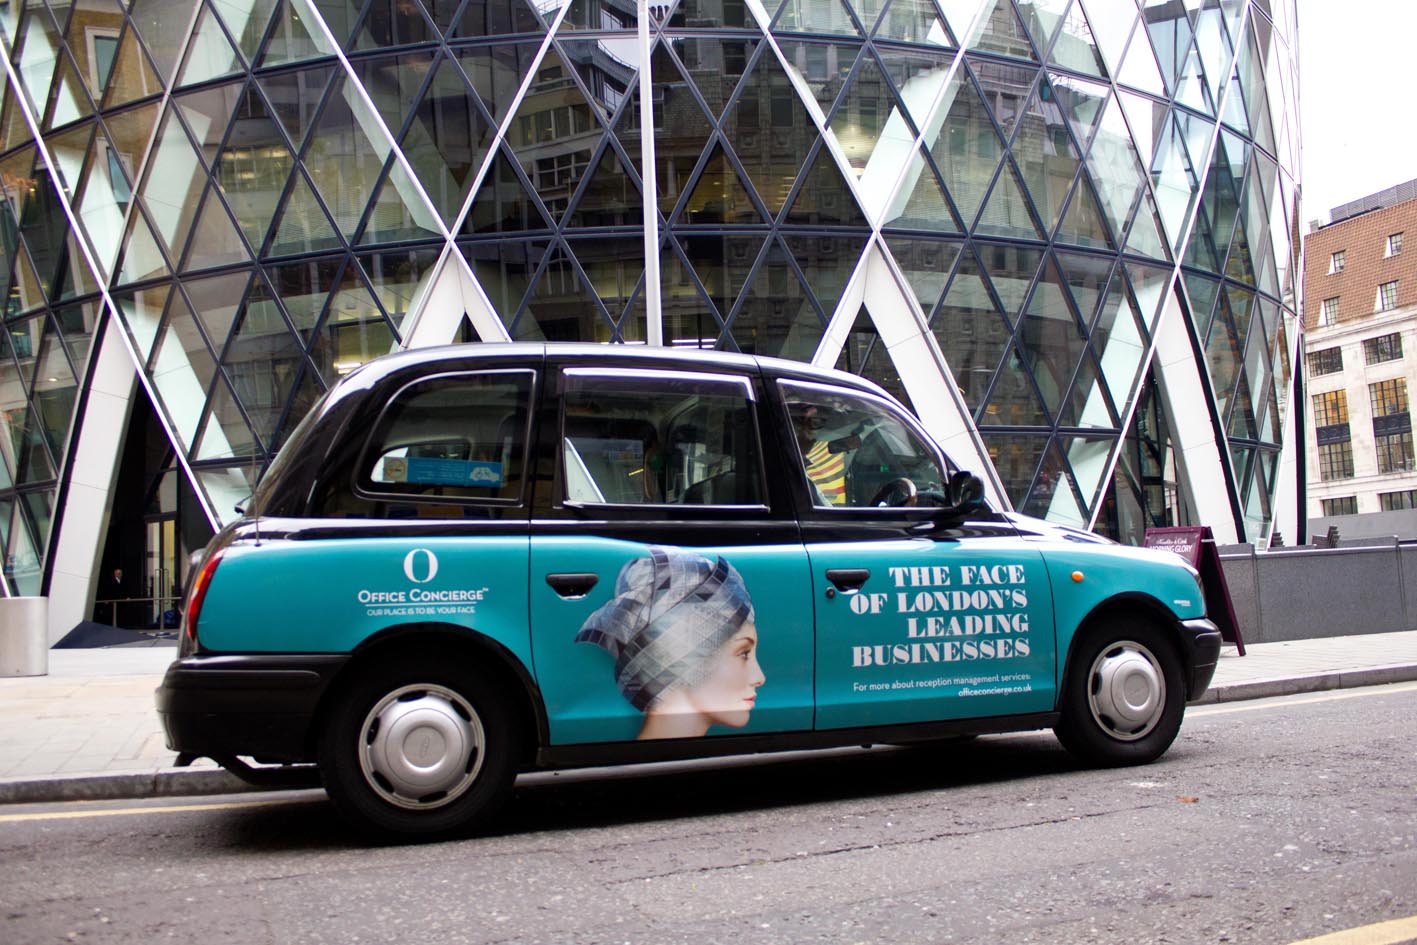 2011 Ubiquitous taxi advertising campaign for Office Concierge - The Face of London's Leading Businesses